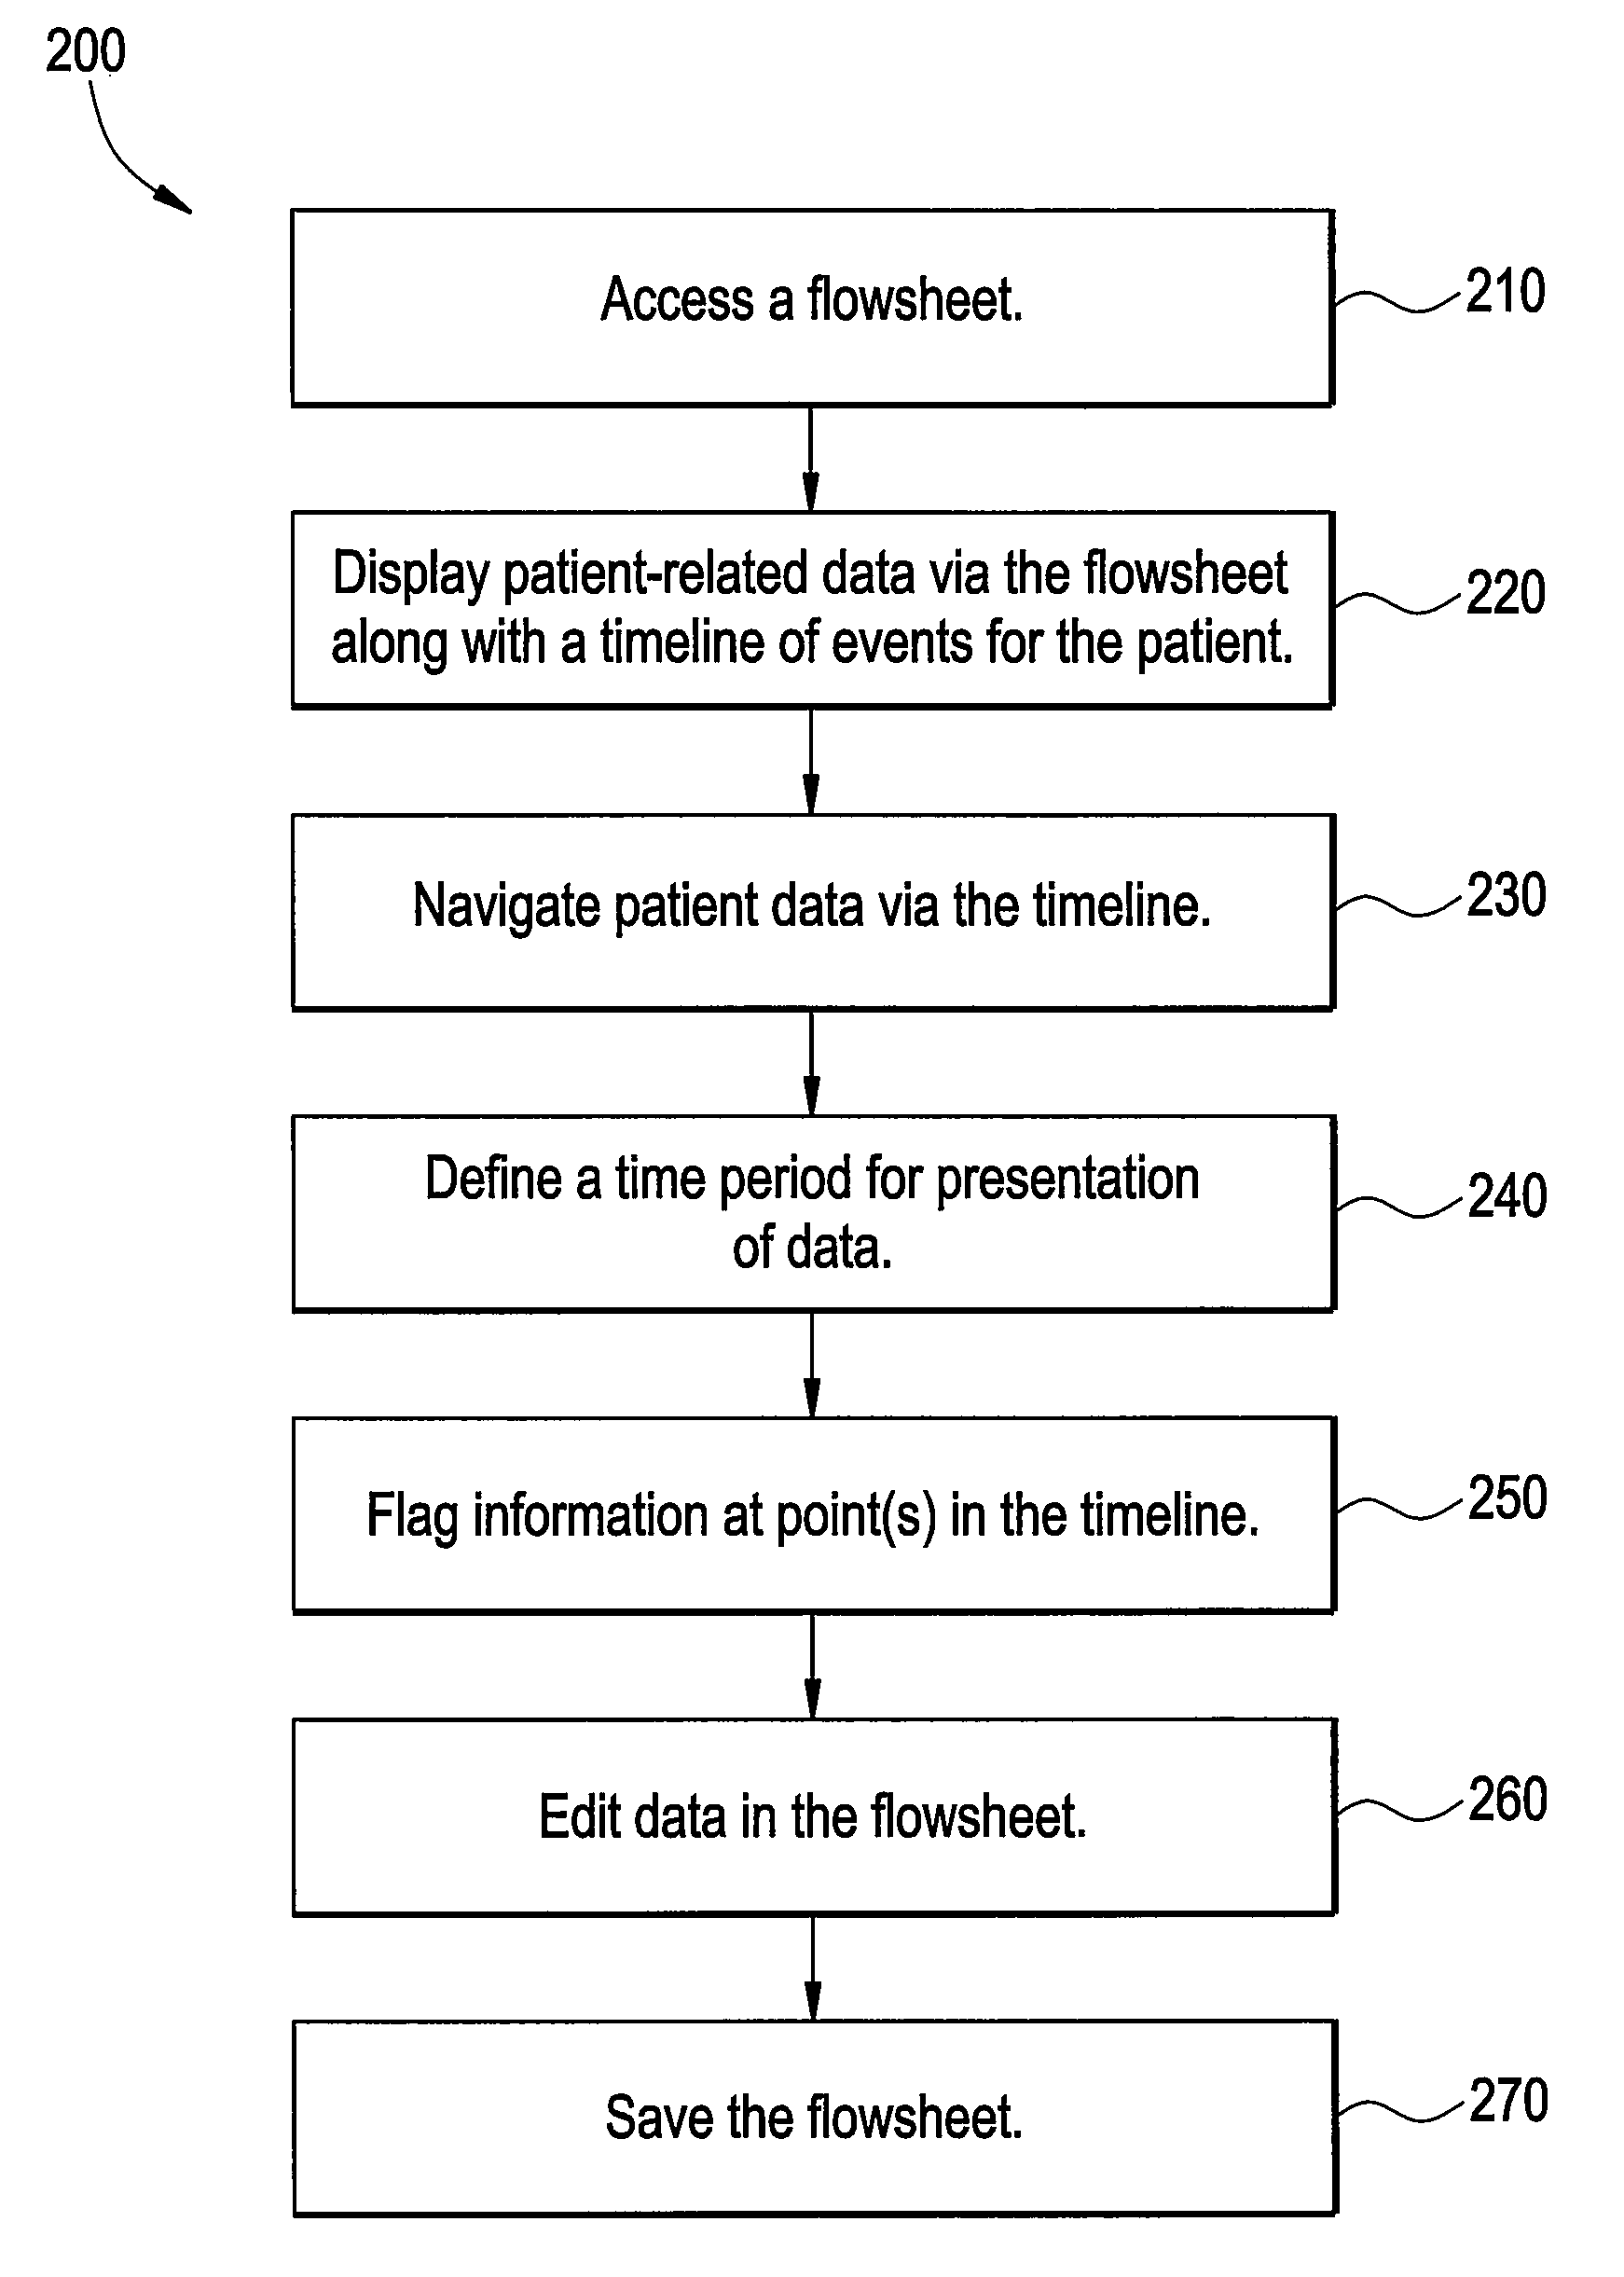 Methods and systems for navigating a large longitudinal dataset using a miniature representation in a flowsheet